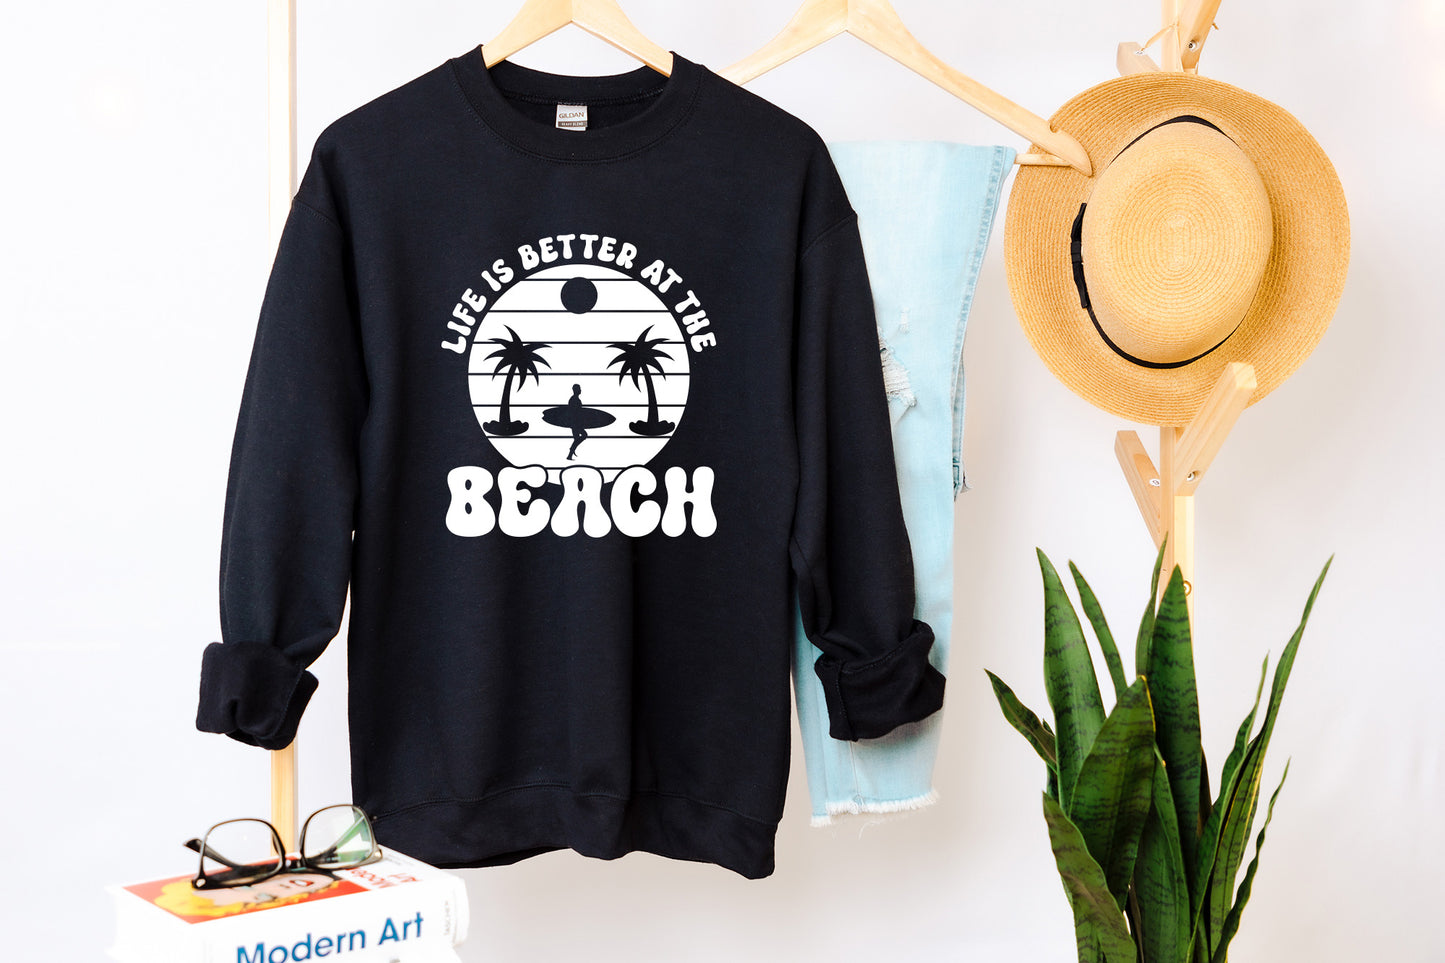 Retro Summer SVG -  Life is Better at the Beach